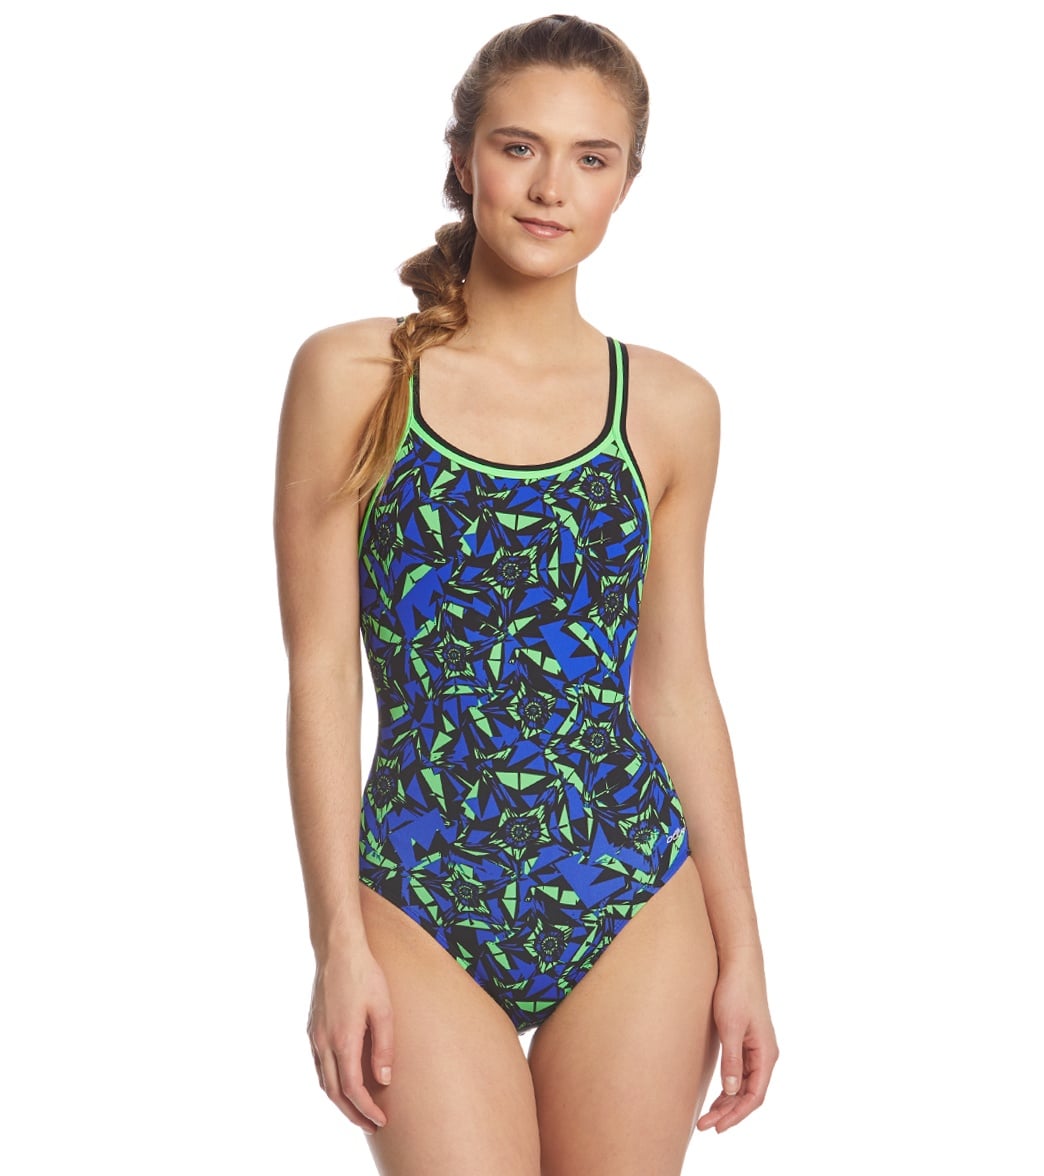 Dolfin Reliance Women's Ion Dbx V-Back One Piece Swimsuit - Blue/Green 26 Polyester - Swimoutlet.com